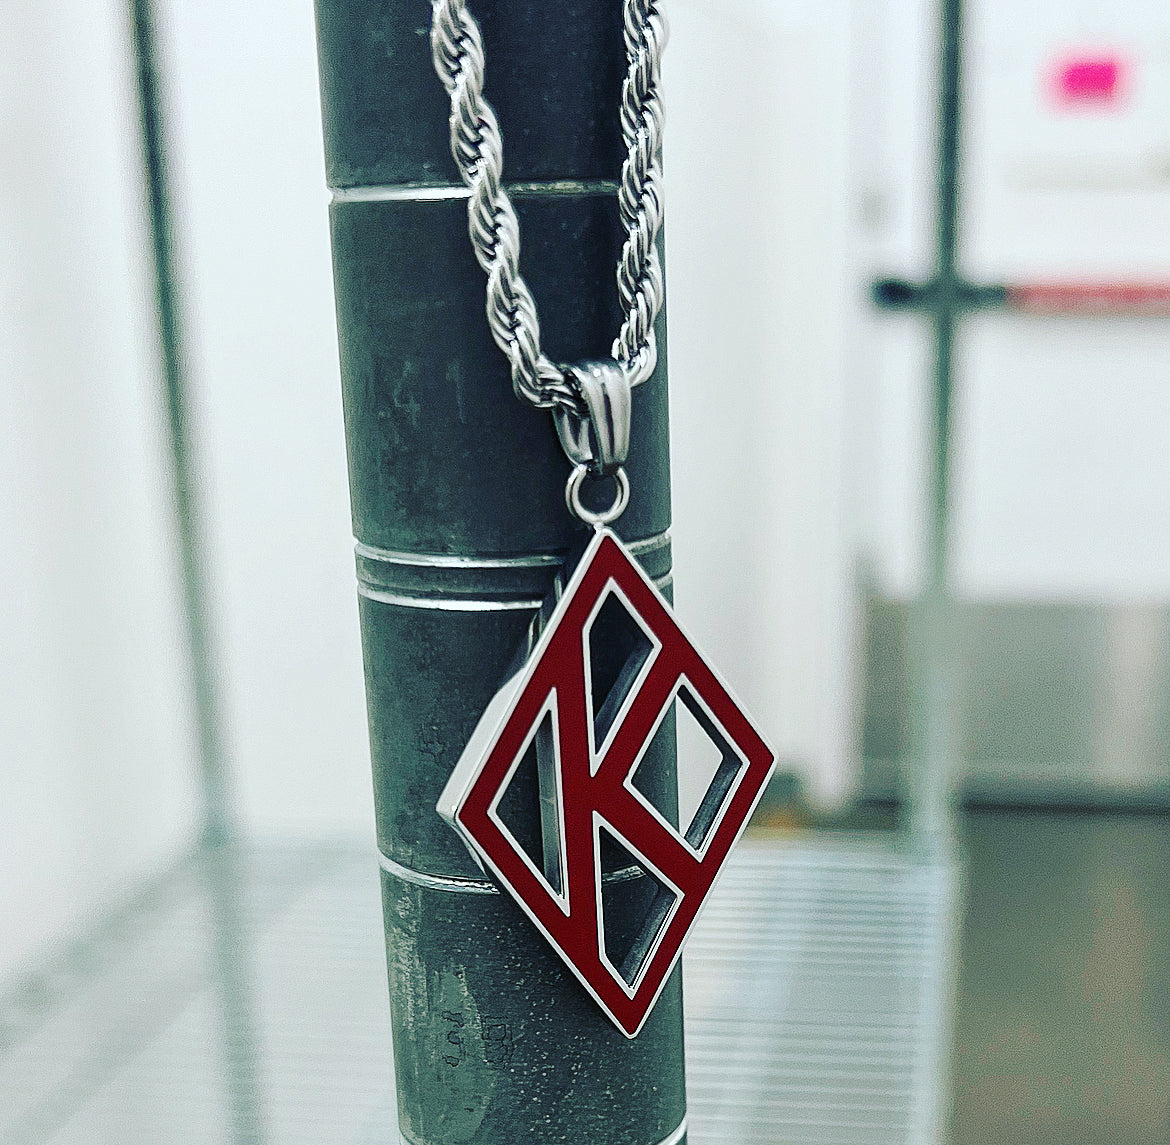 Crafted with the highest quality materials, this piece is built to last and withstand the test of time. Whether you're looking to add to your collection or purchase a special gift for a fellow member in the Bond, this necklace is sure to impress. So don't wait, order yours today and show off your Kappa Alpha Psi pride in style.